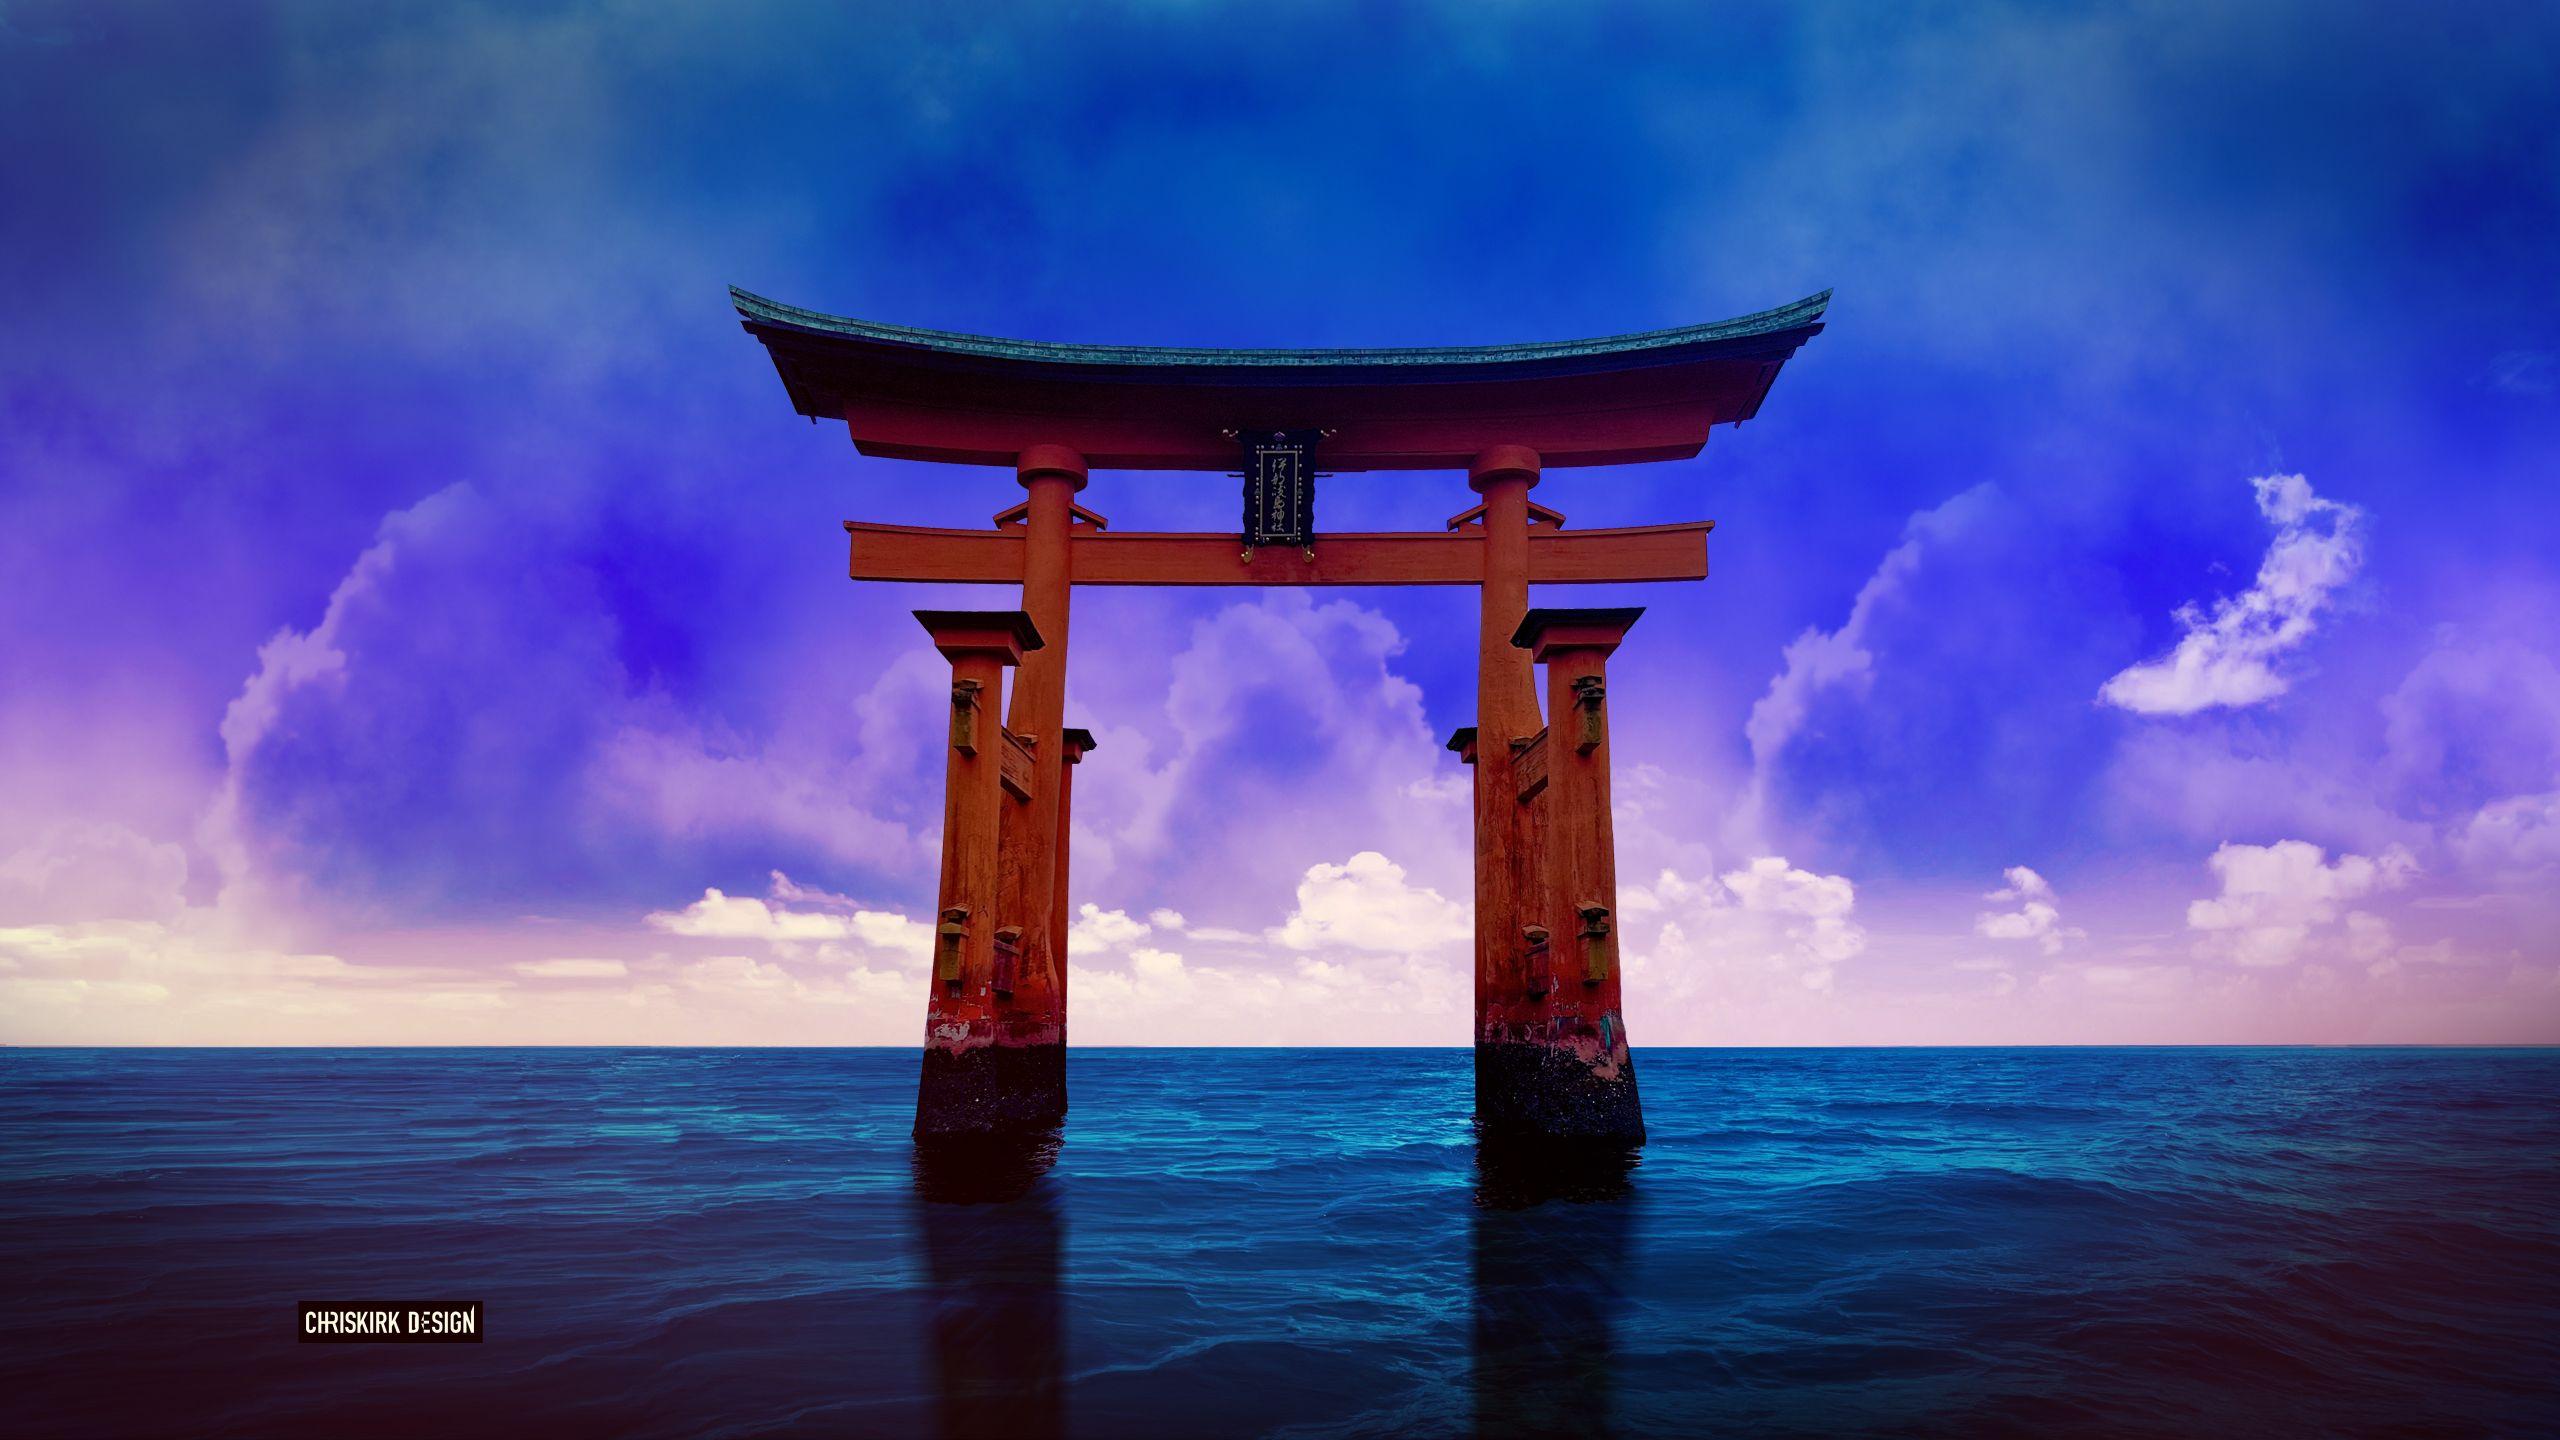 A Torii Gate in the Japanese Sea HD Wallpaper. Background Image